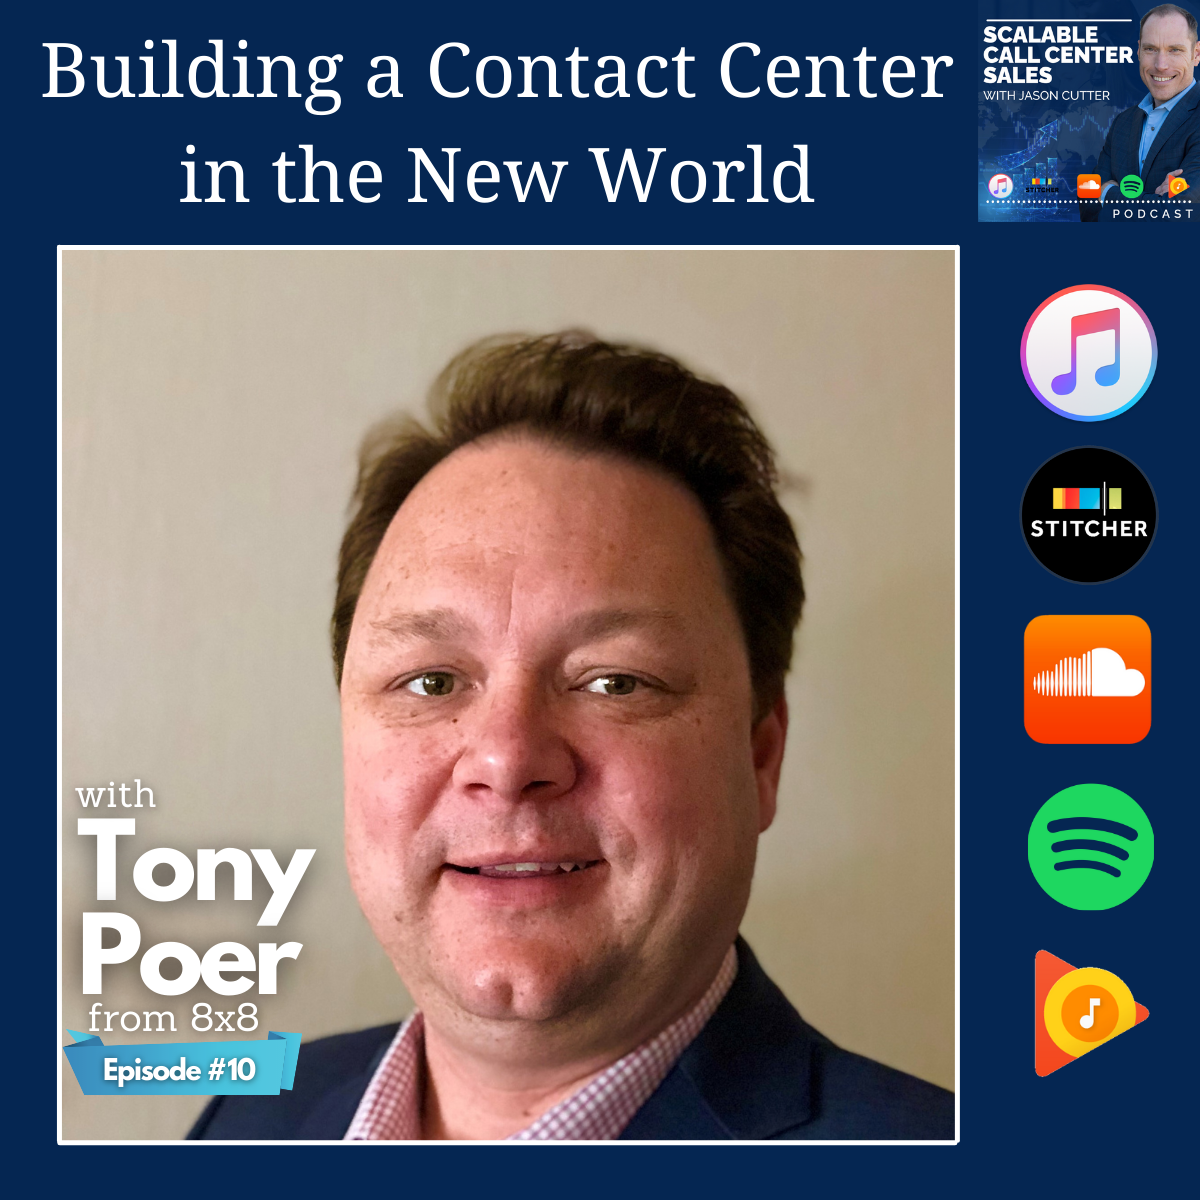 [010] Building a Contact Center in the New World, with Tony Poer from 8x8